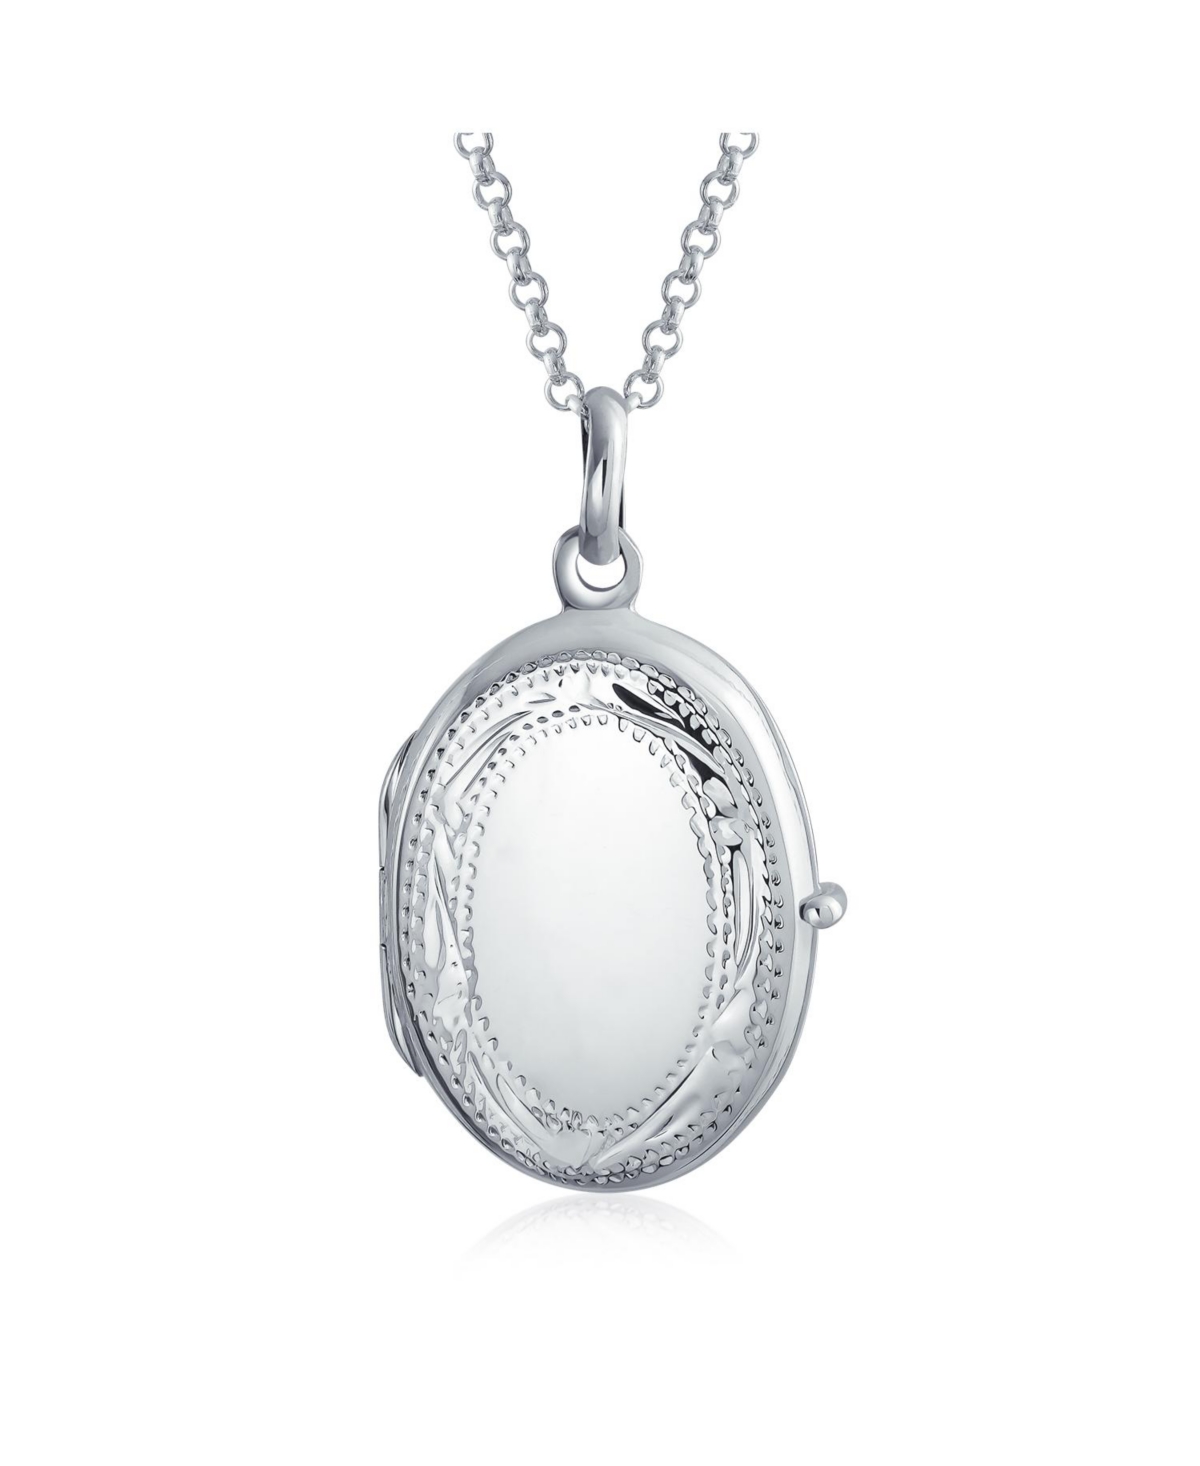 Etched Leaf Scroll Holds Two Memory Photo Picture Oval Locket For Women .925 Sterling Silver Pendant Necklace - Silver